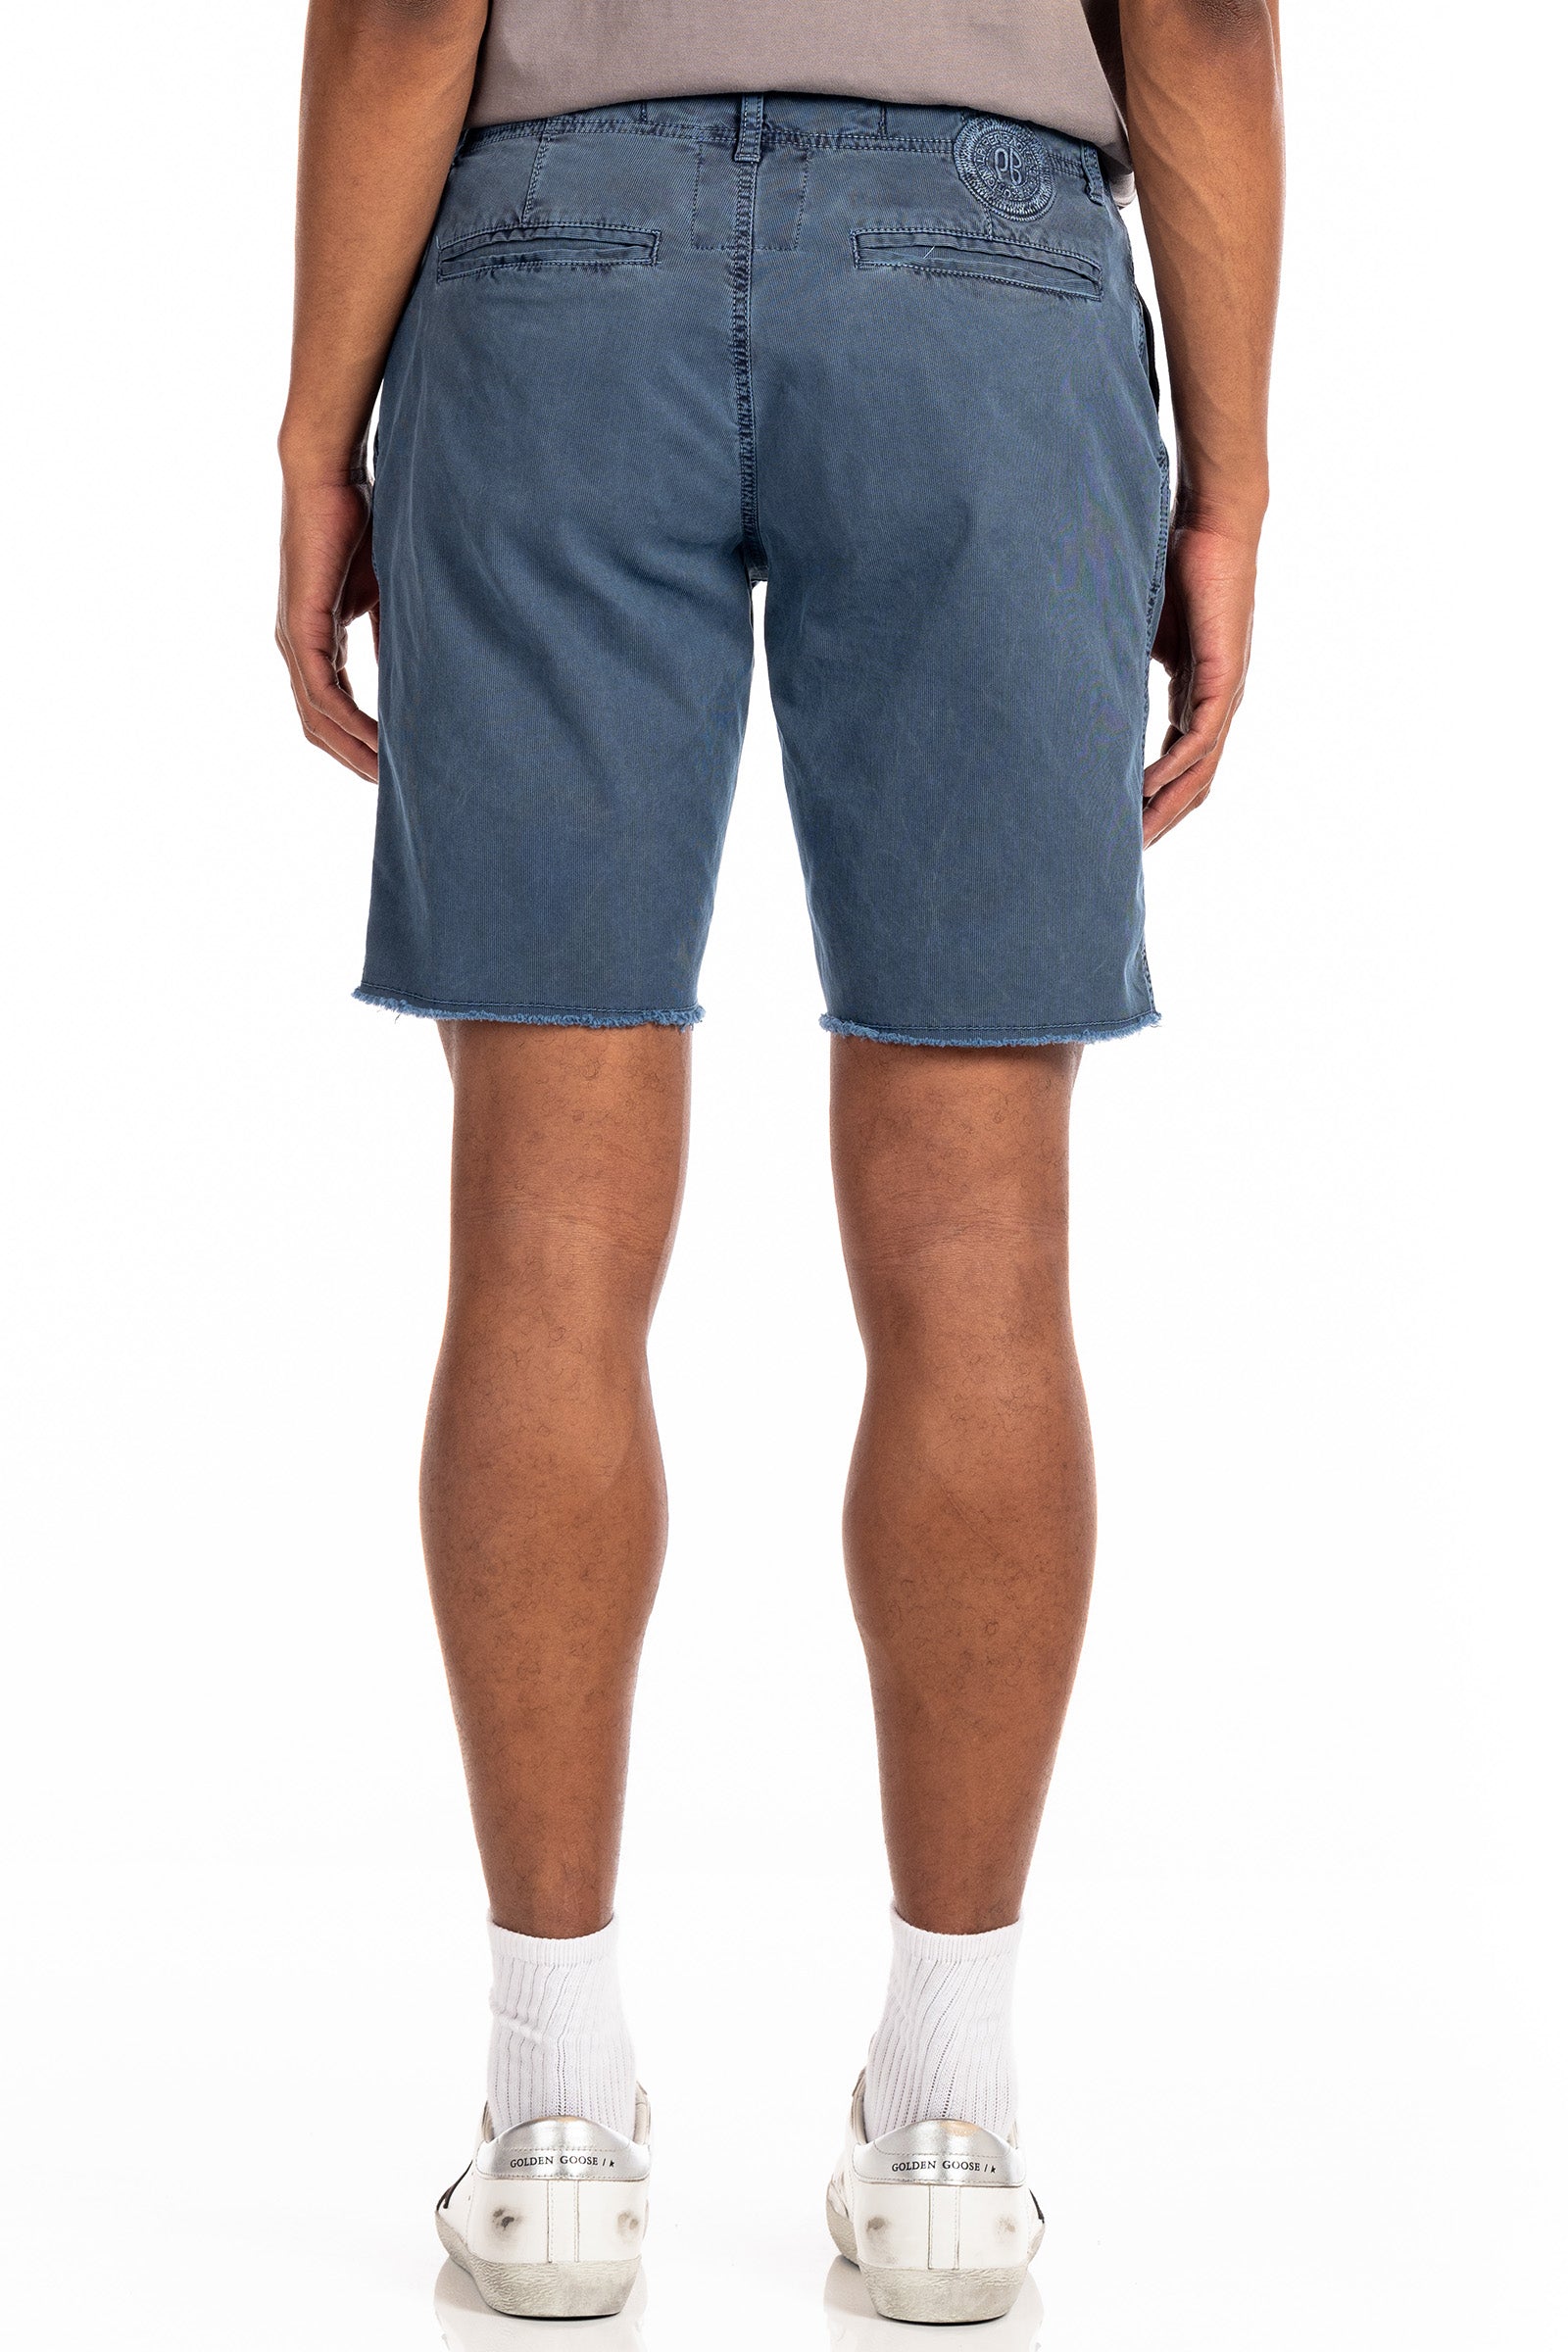 Original Paperbacks Brentwood Chino Short in Slate on Model Cropped Back View